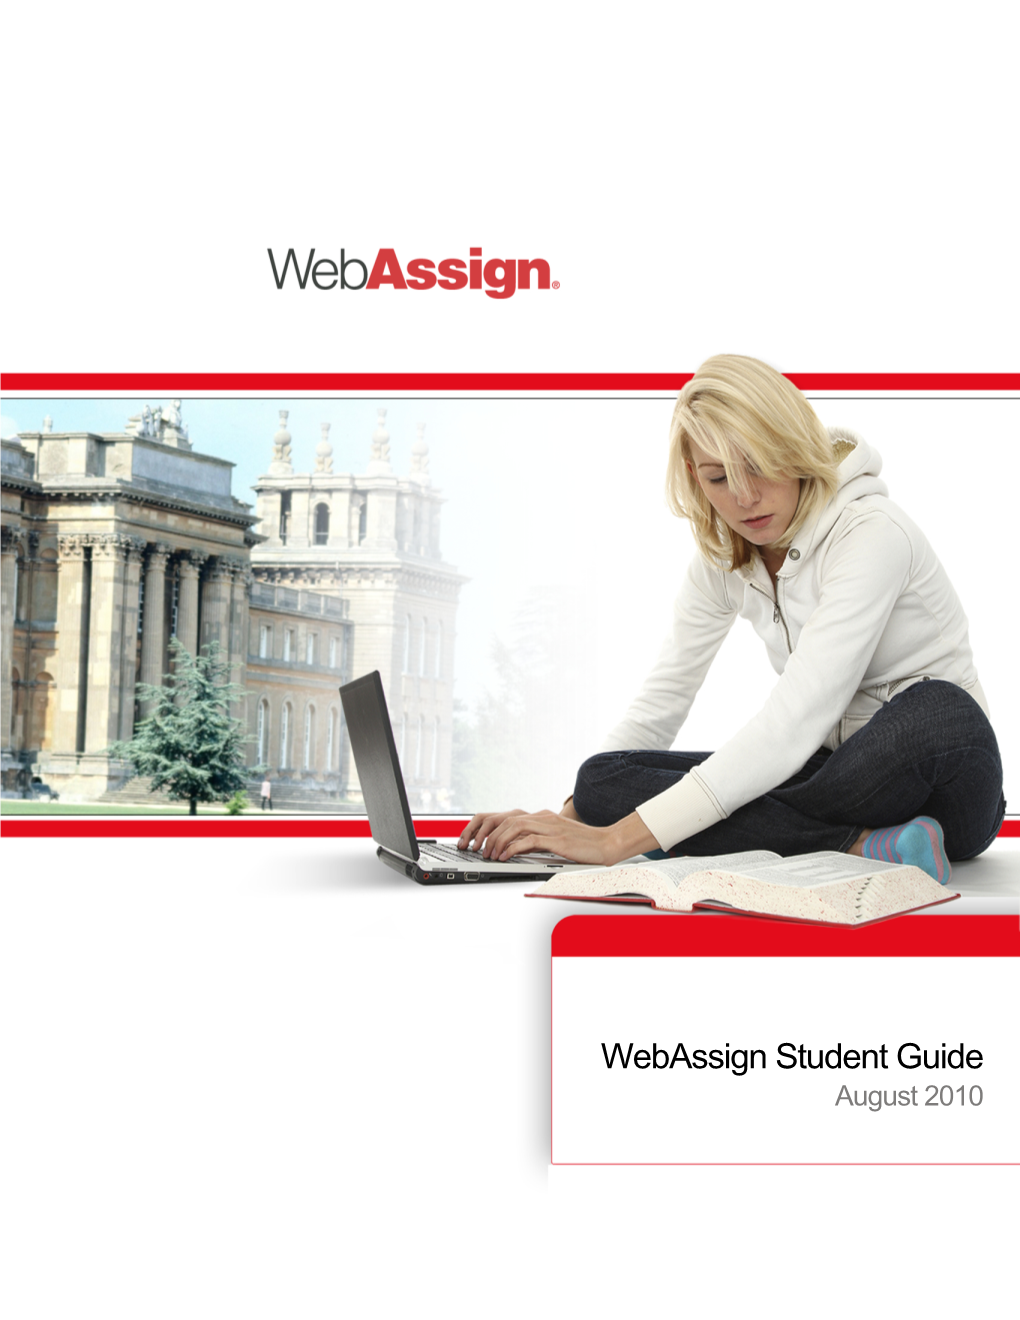 Webassign Student Guide August 2010 Webassign Student Guide Is Published by Advanced Instructional Systems, Inc